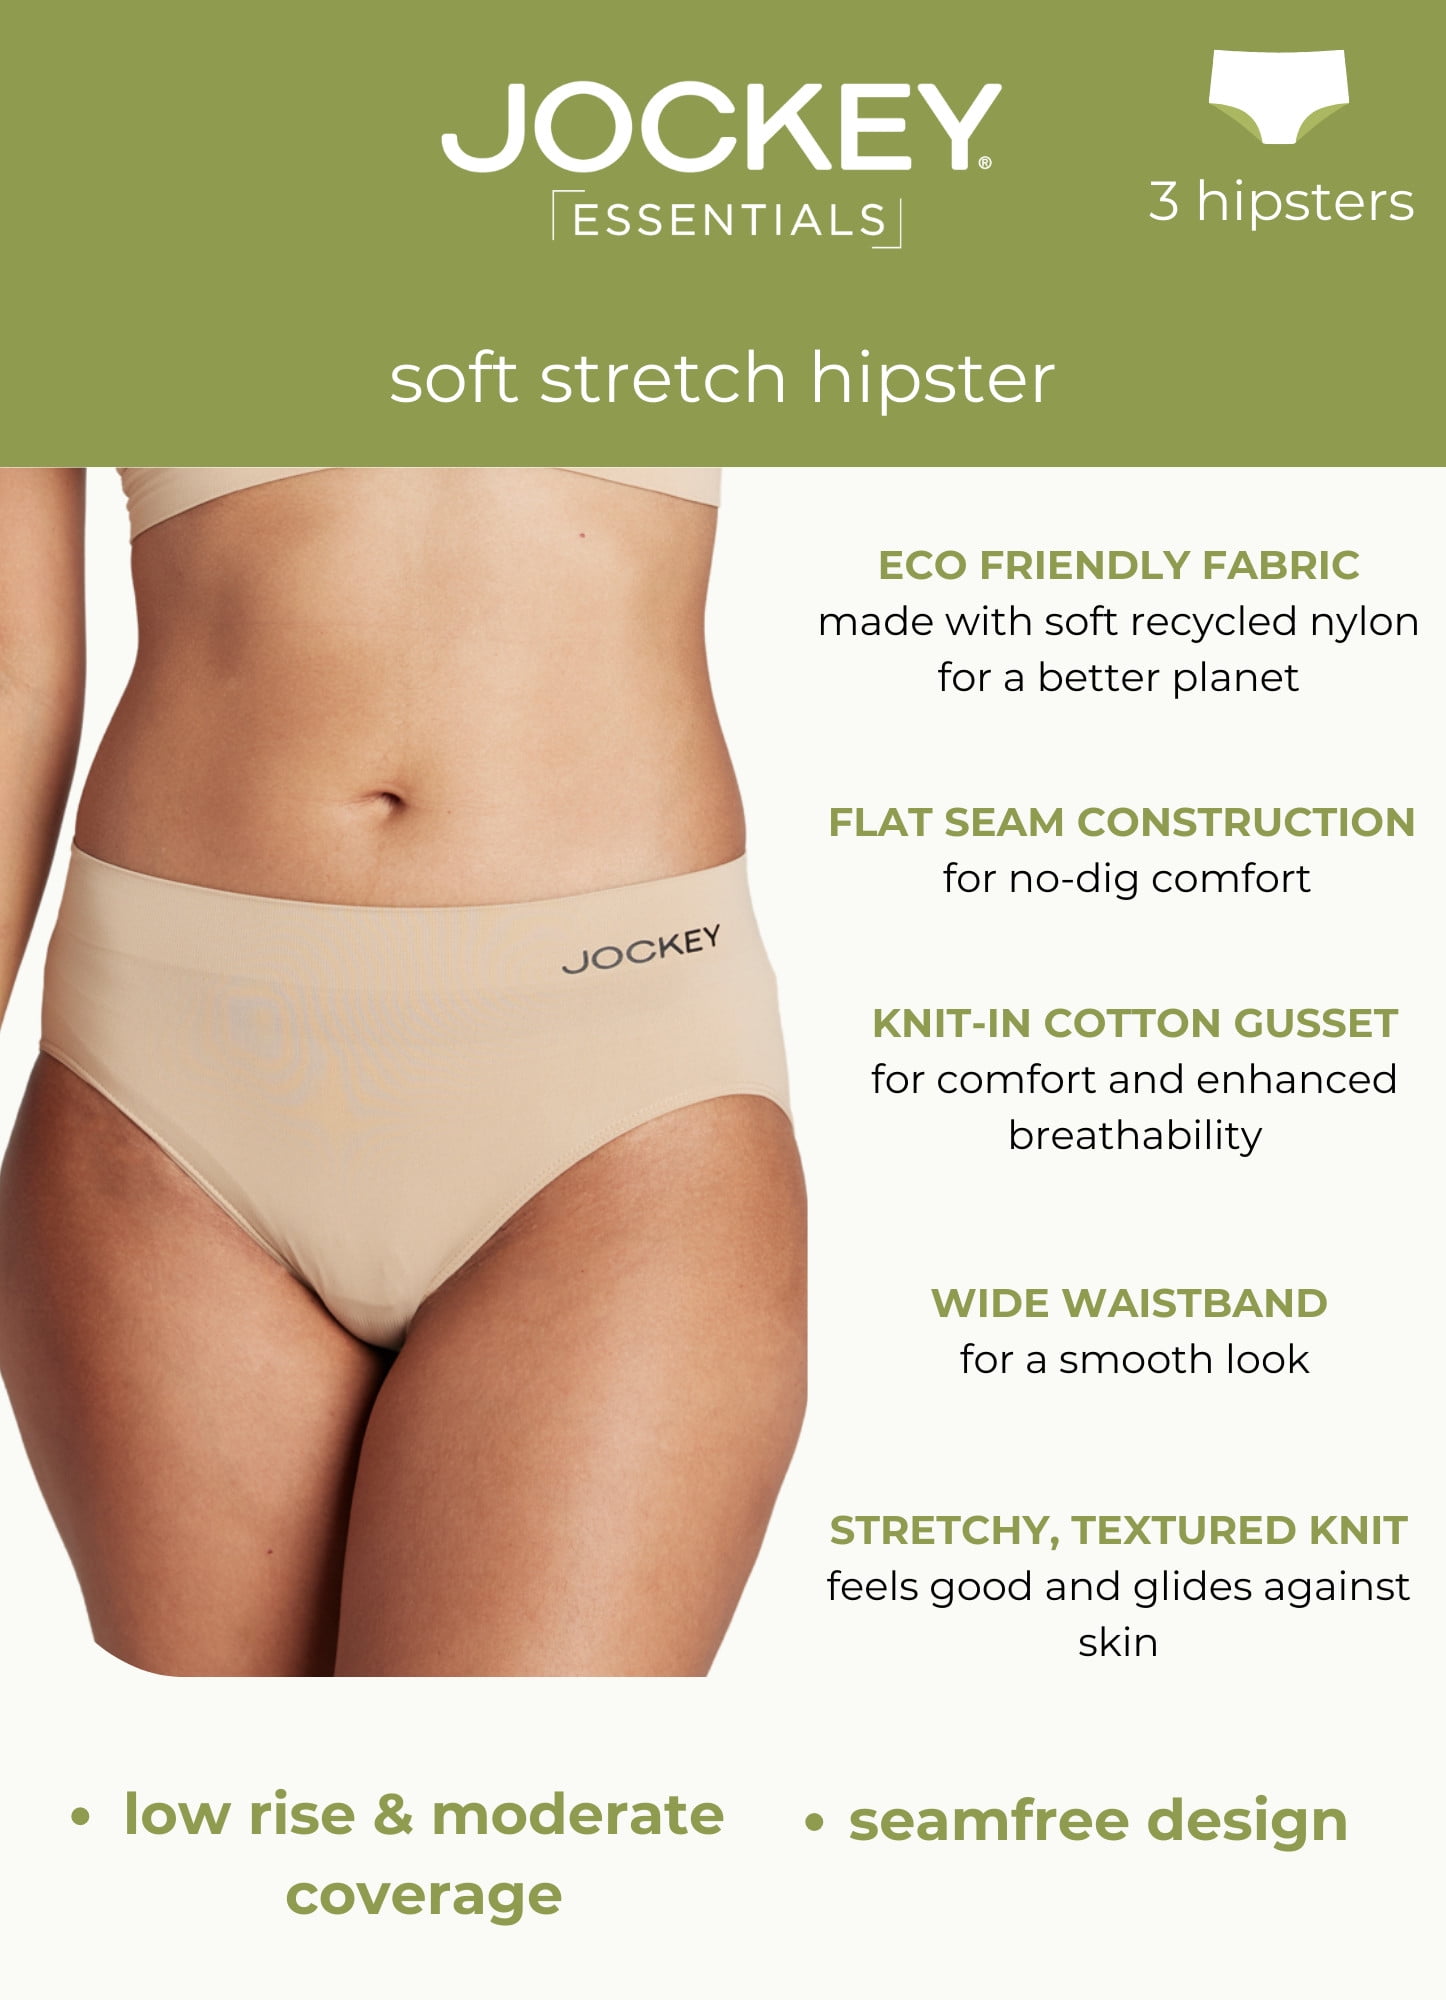 Soft-Knit No-Show Hipster Underwear for Women 3-Pack